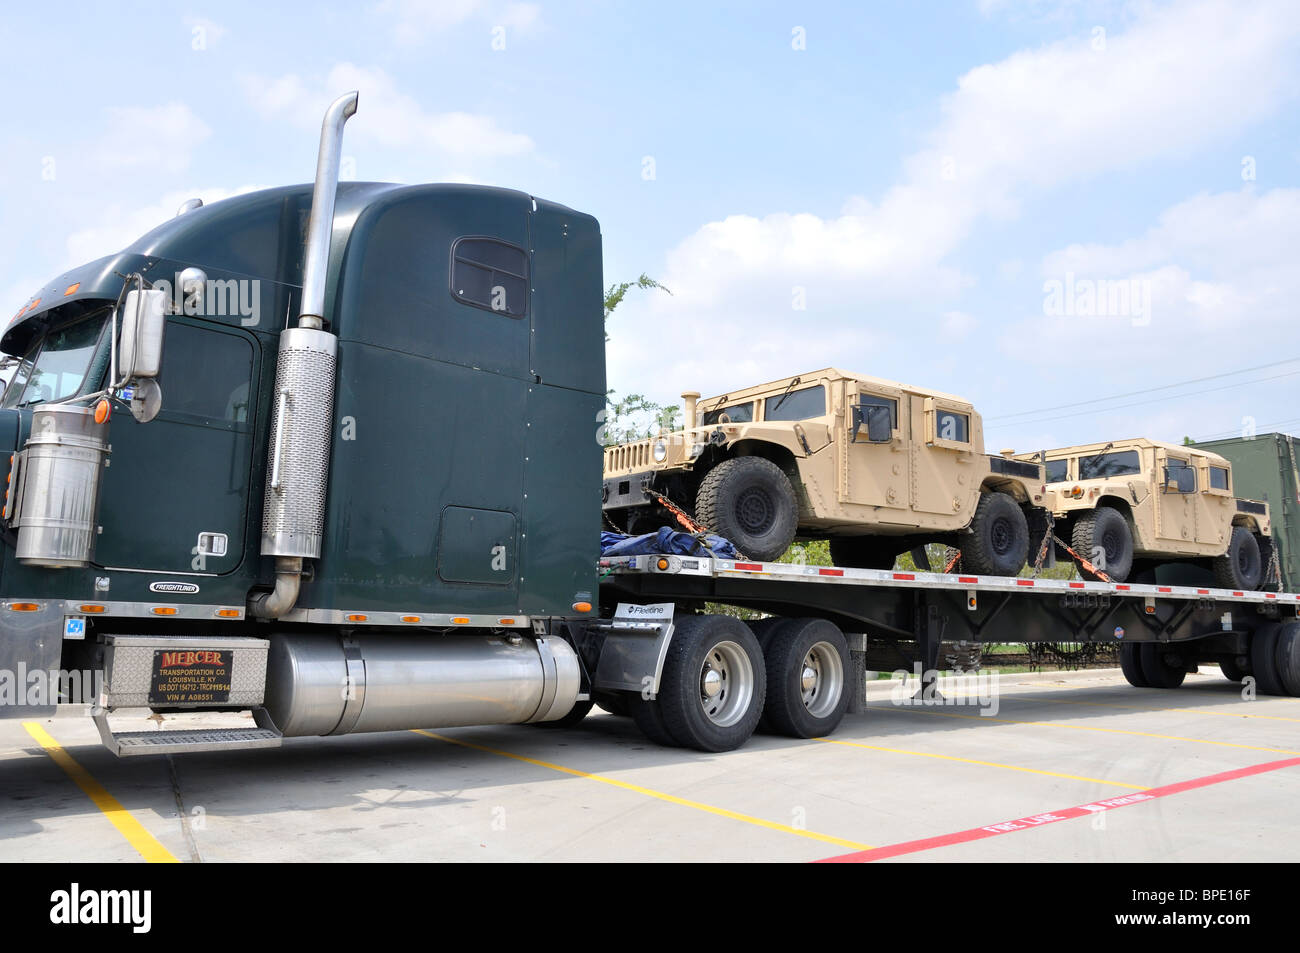 US military trucks being transported on large truck Stock Photo